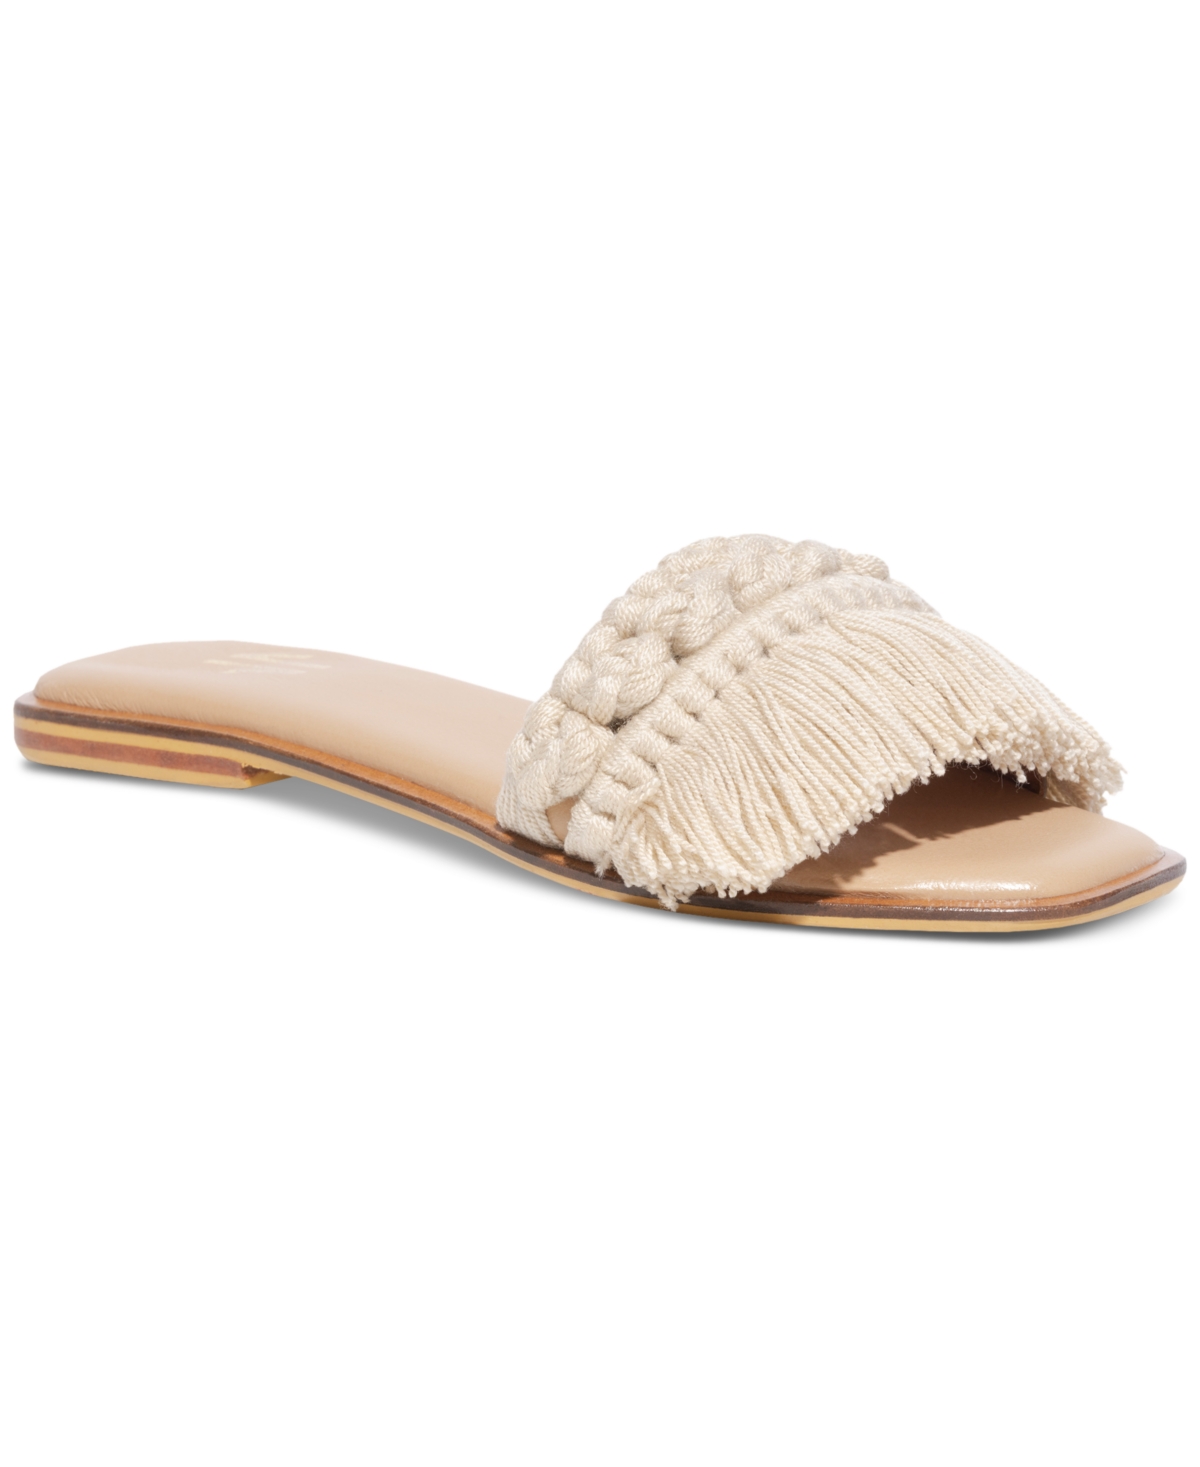 Silvia Cobos Women's Candy Fringe Flat Sandals Women's Shoes In Beige ...